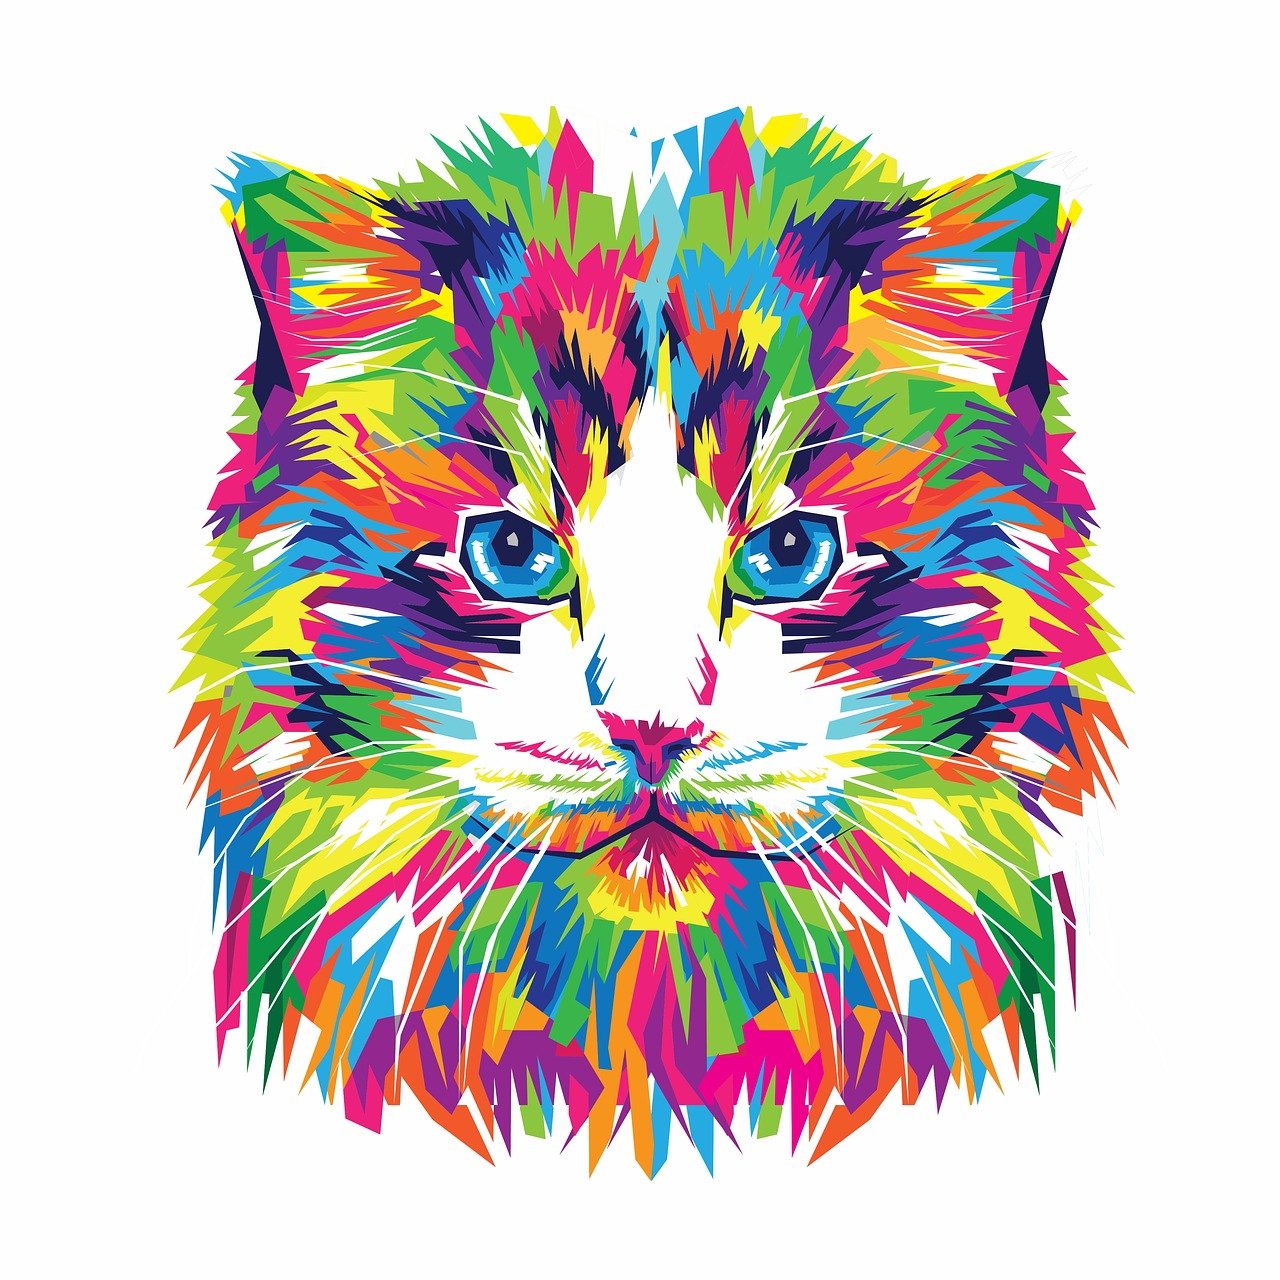 a colorful cat's face on a white background, vector art, inspired by Lisa Frank, shutterstock, furry art, maine coon, vibrant high contrast, vaporwave colors, full color illustration